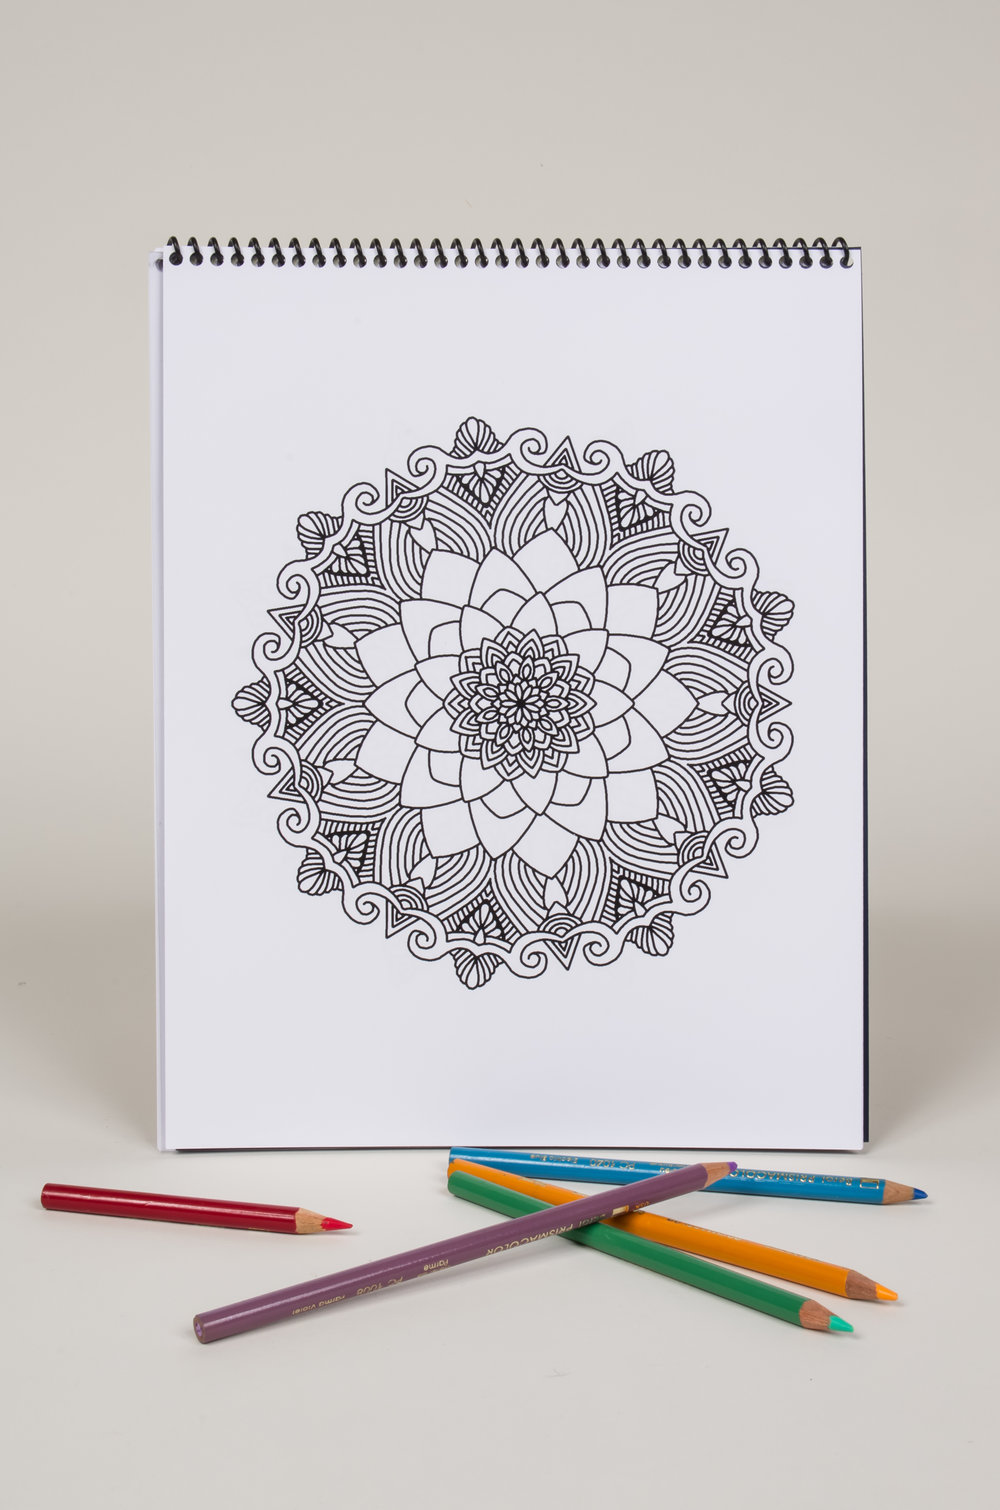  a sample of one of the mandalas that you can color in.&nbsp; 